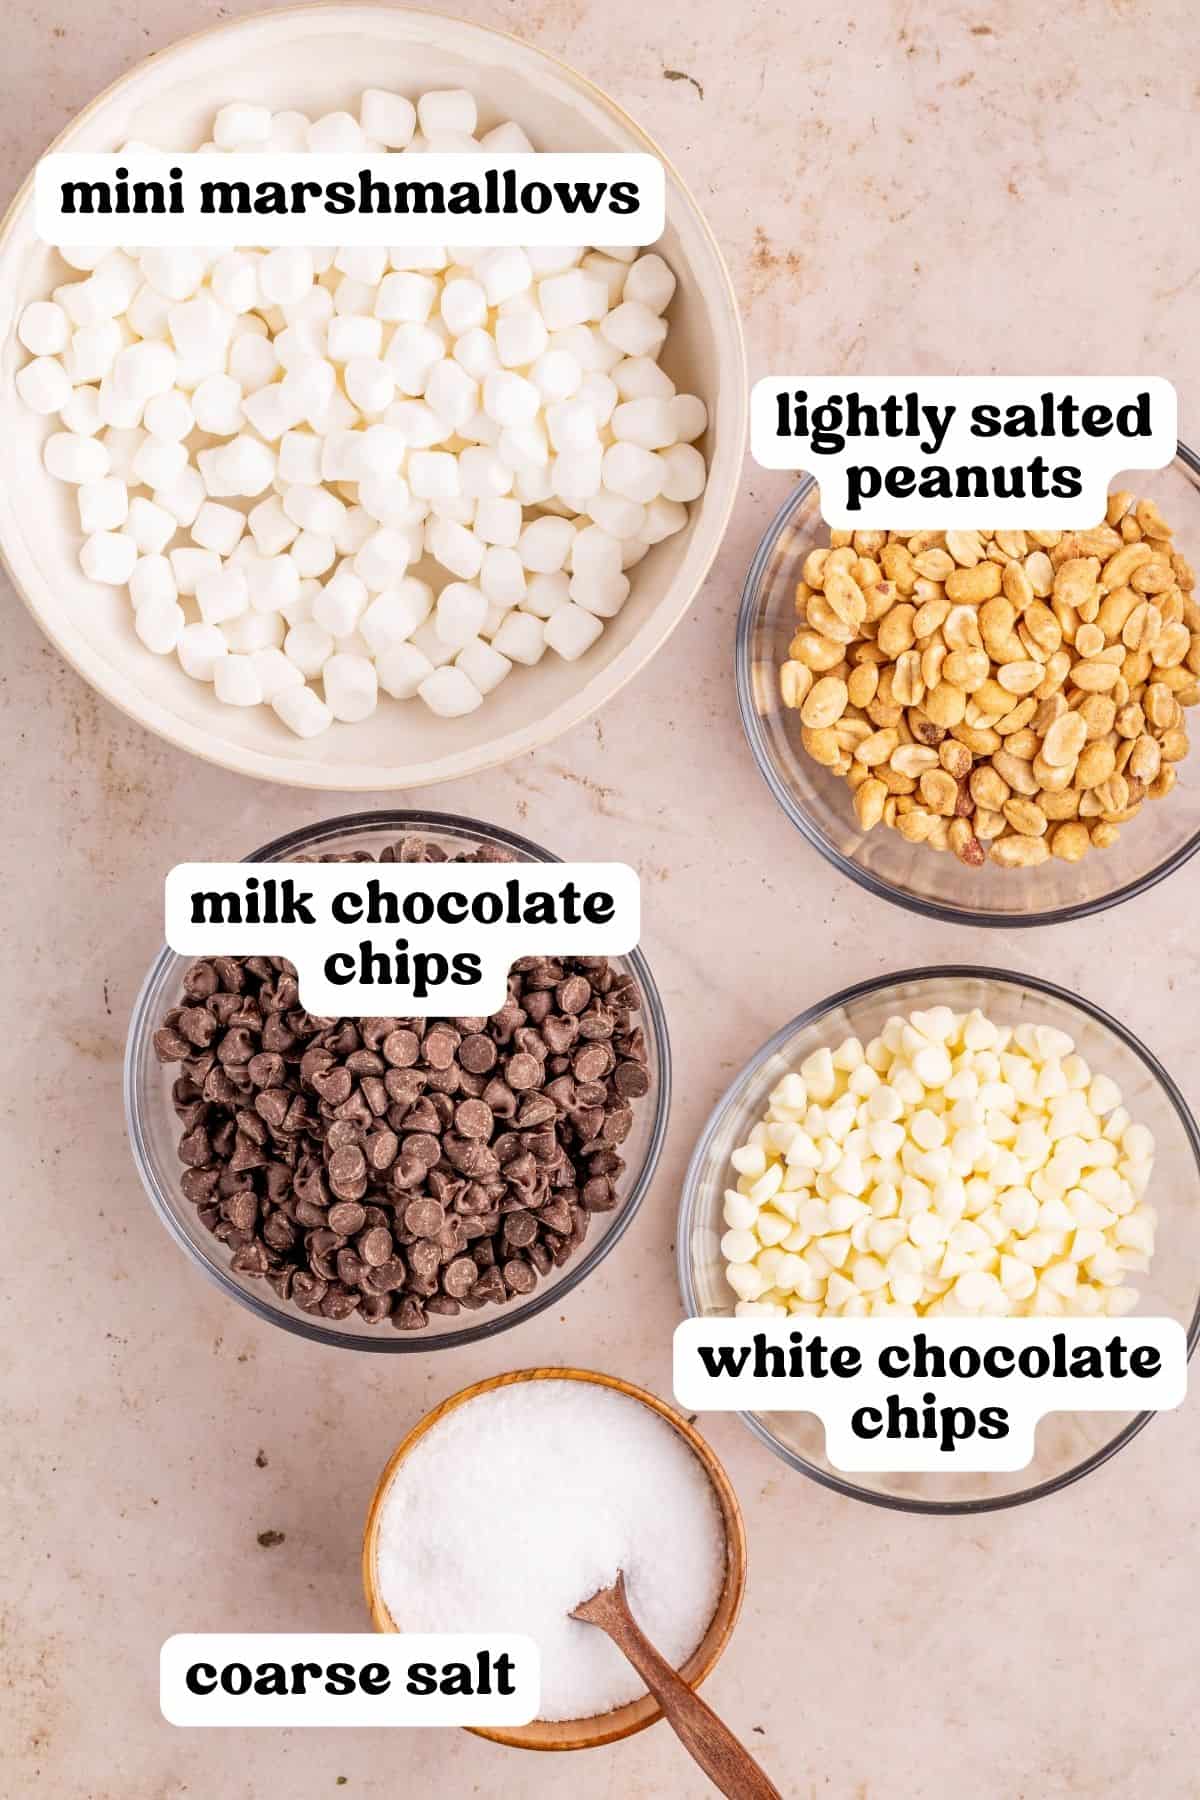 Mini marshmallows, lightly salted peanuts, milk chocolate chips, white chocolate chips, and coarse salt in bowls.